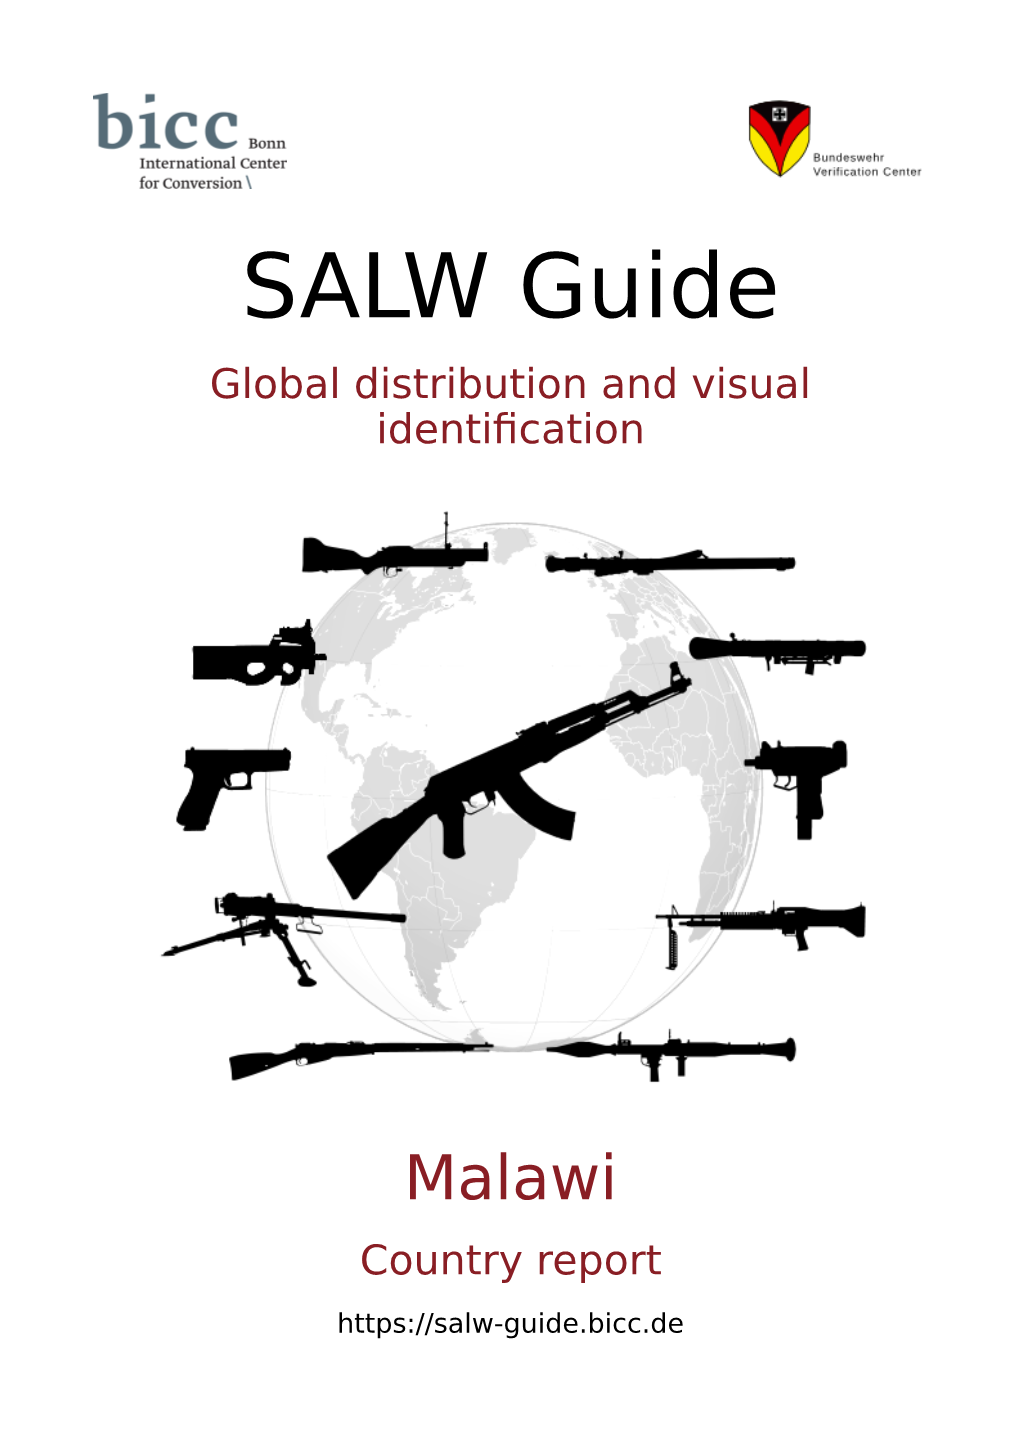 Malawi Country Report